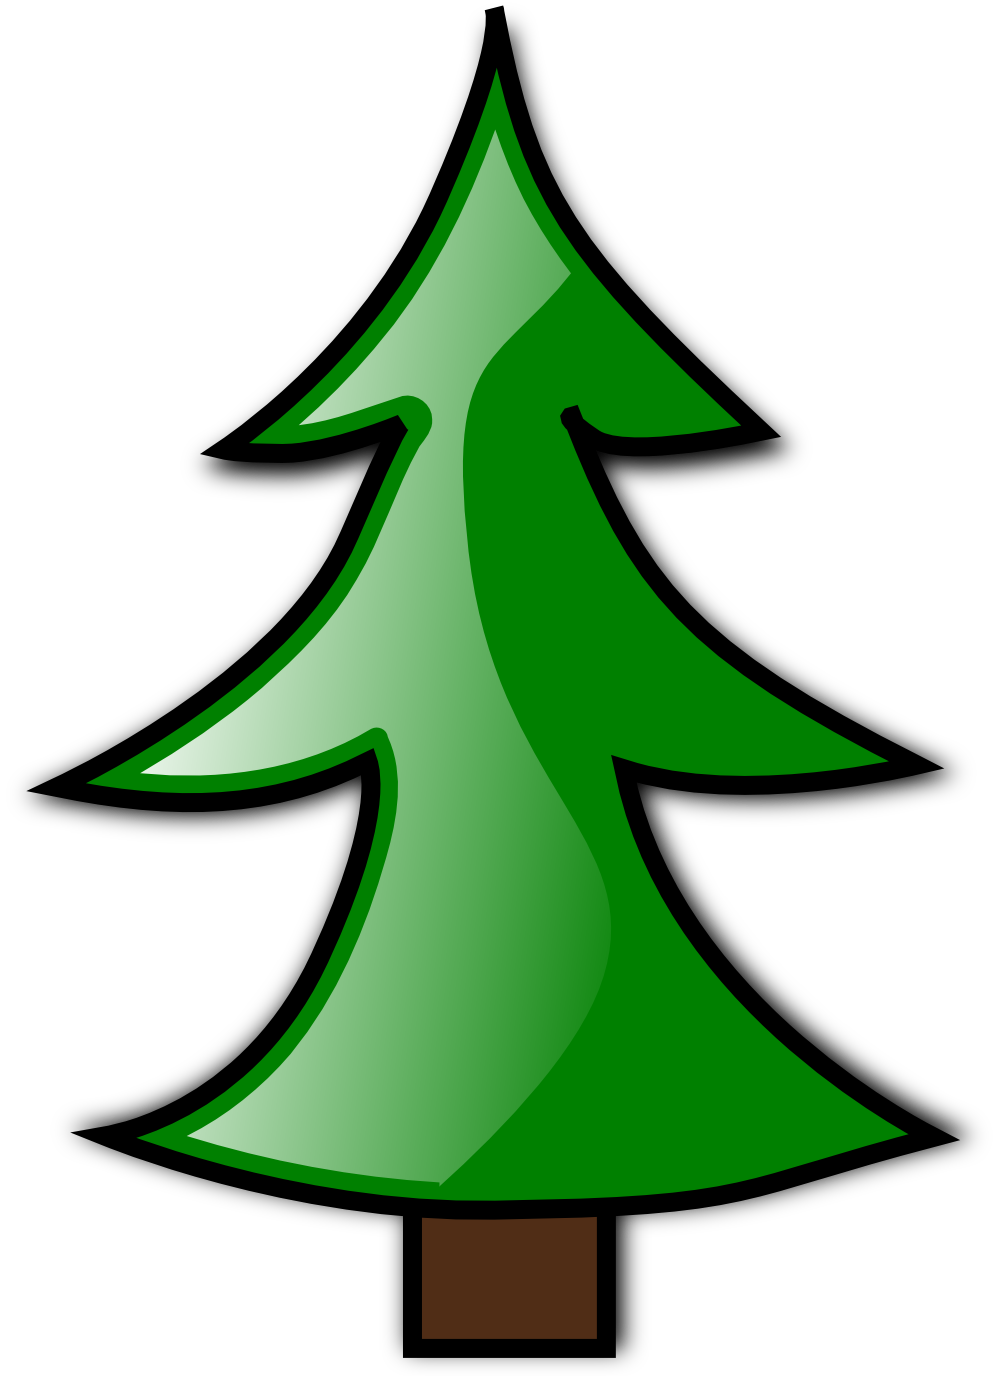 Christmas Trees Pictures Clip Art - ClipArt Best